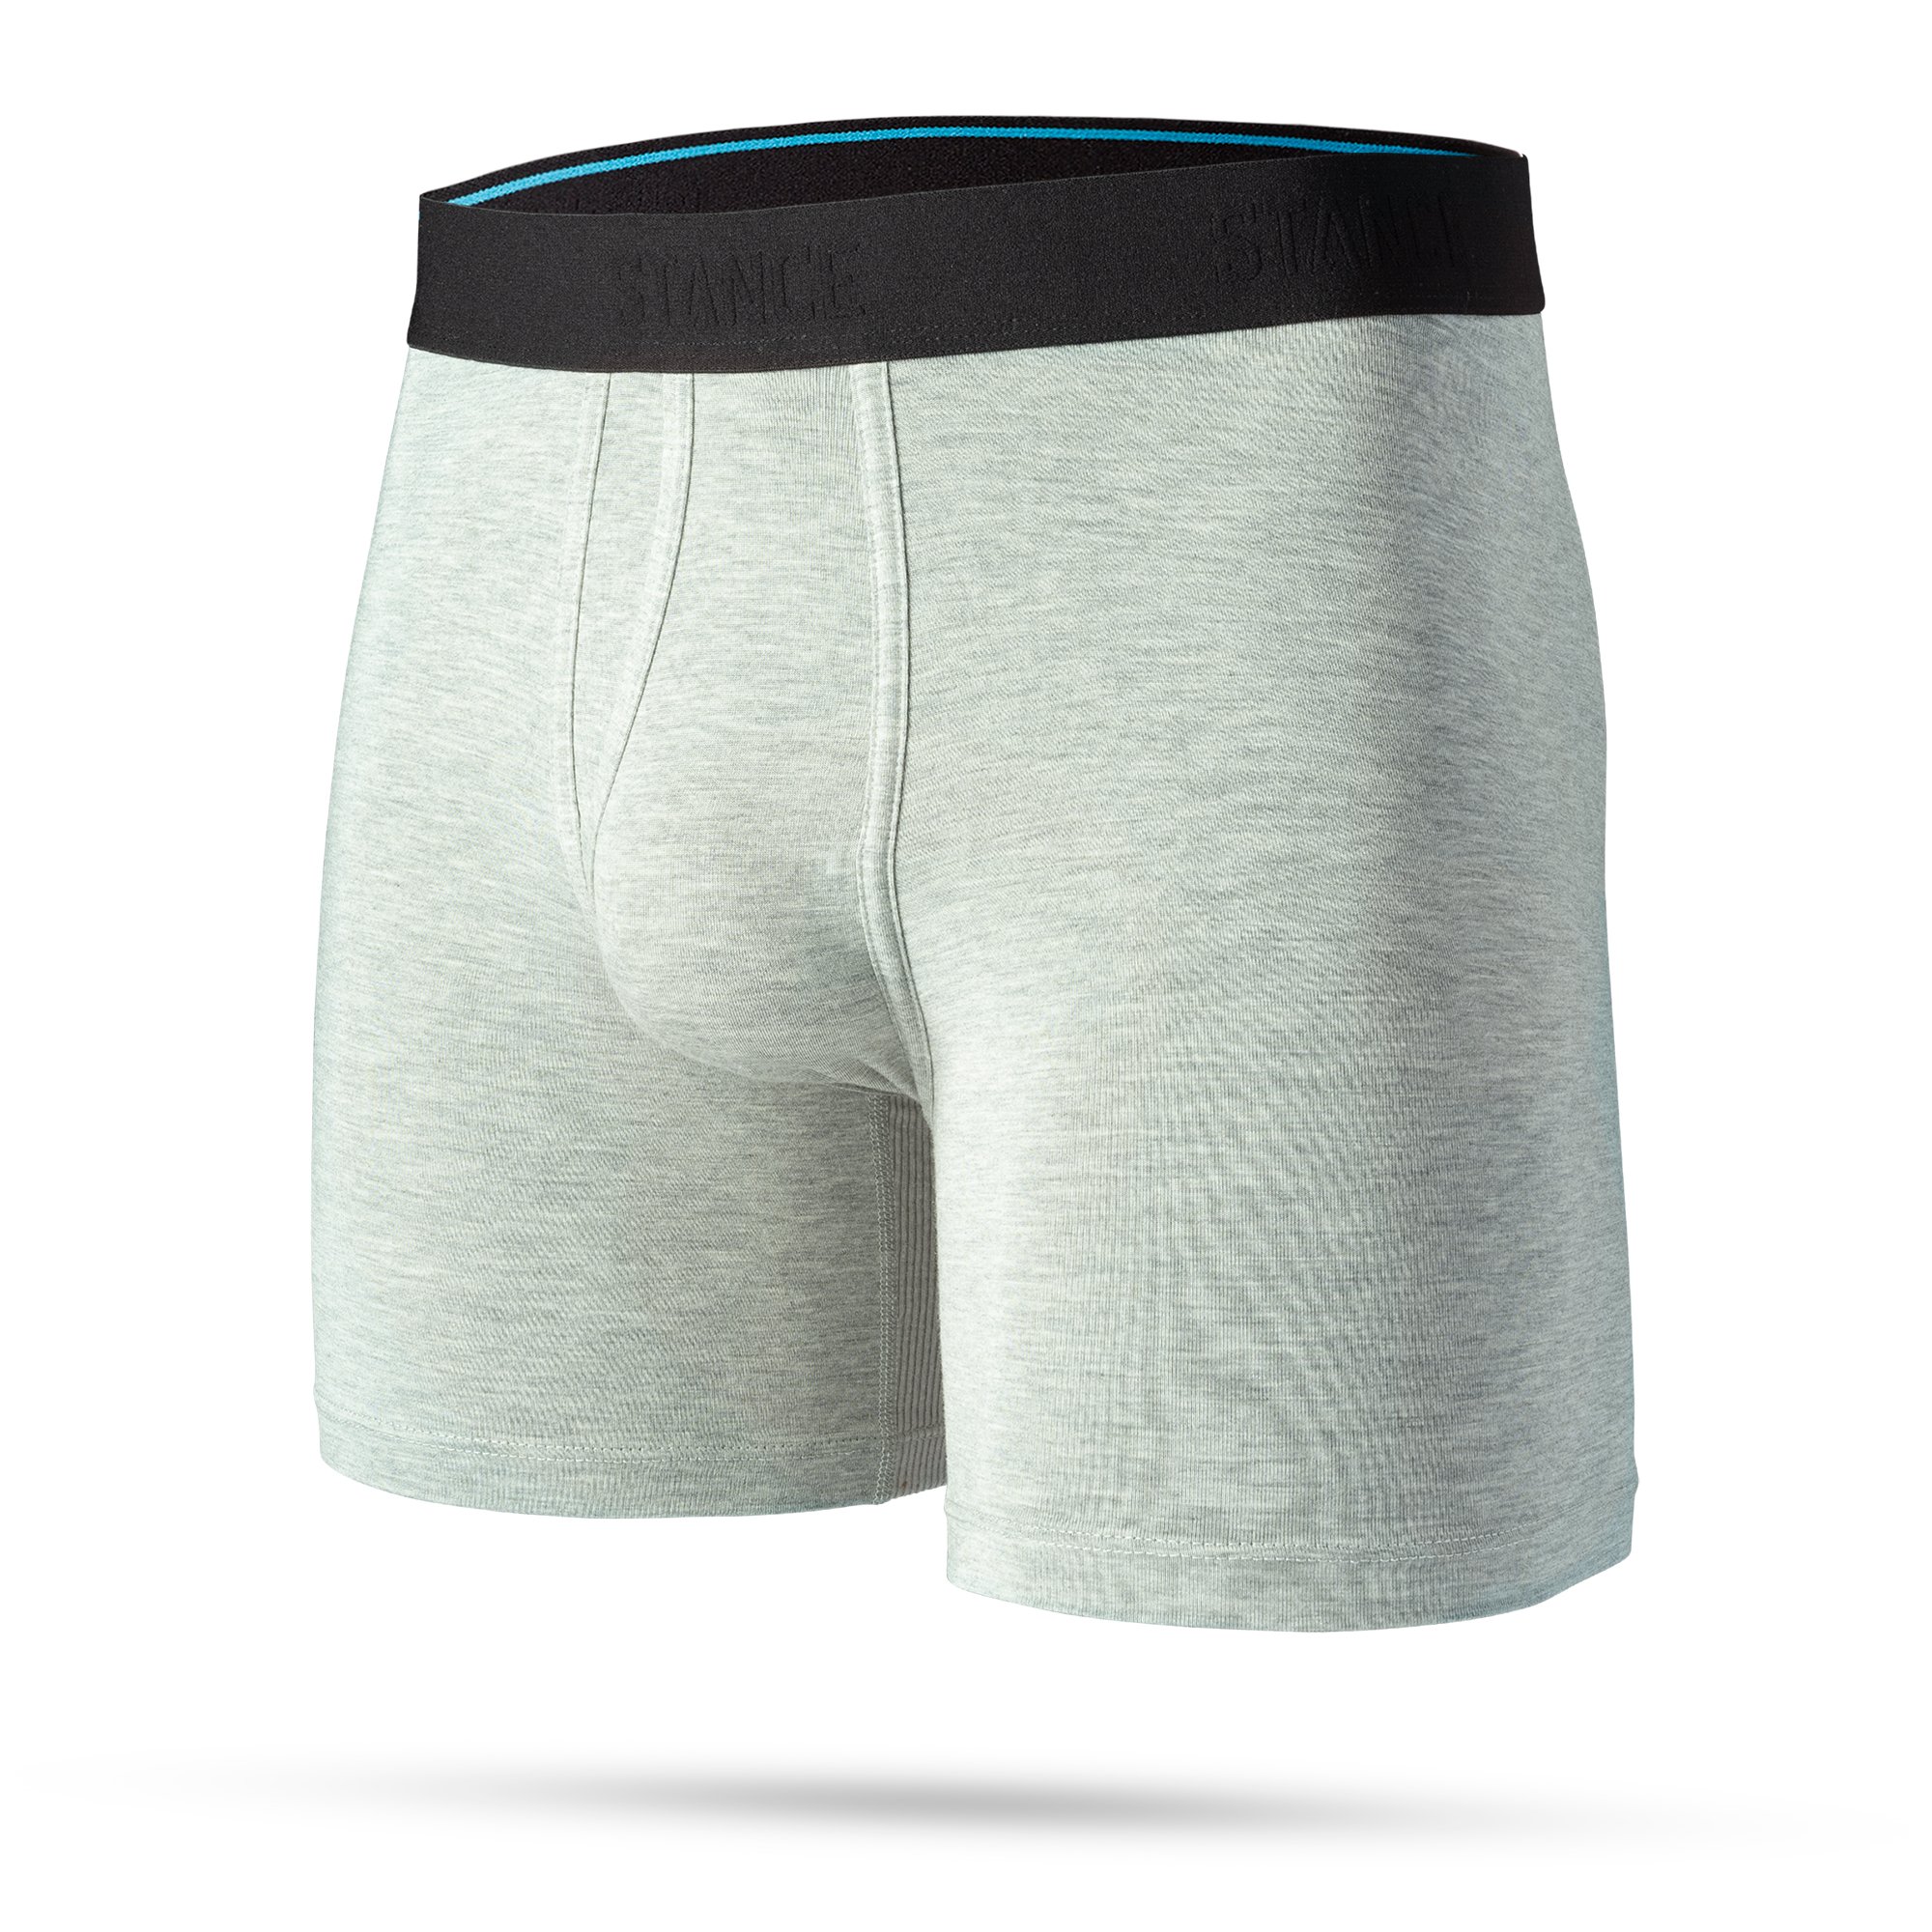 Stance Ramp Butter Blend Boxer Brief – Seattle Thread Company